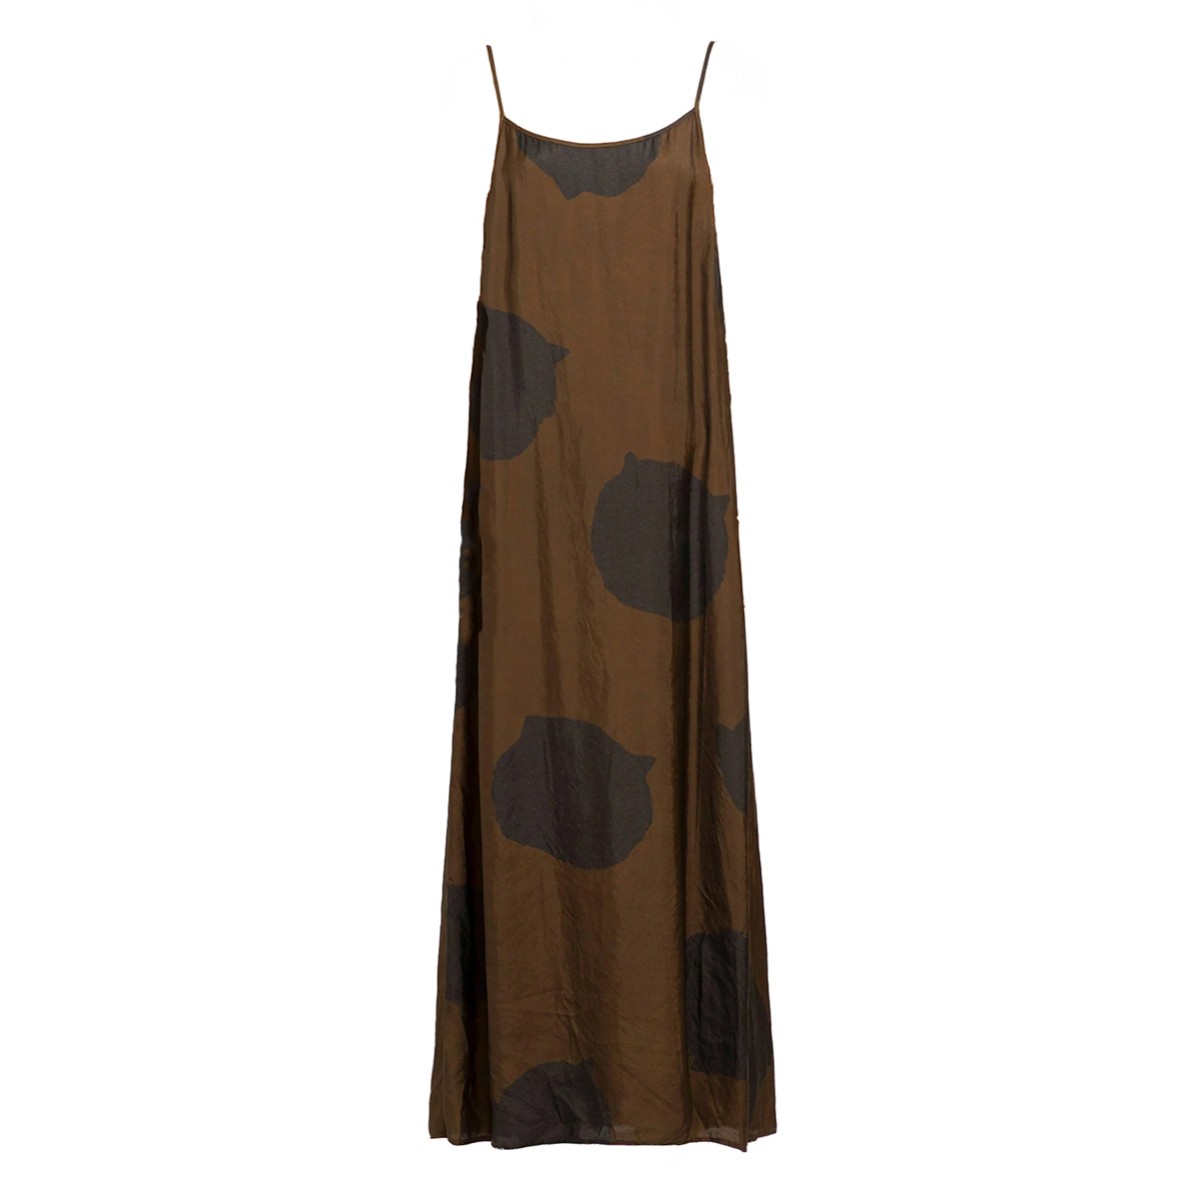 BROWN AND BLACK MAXI DRESS